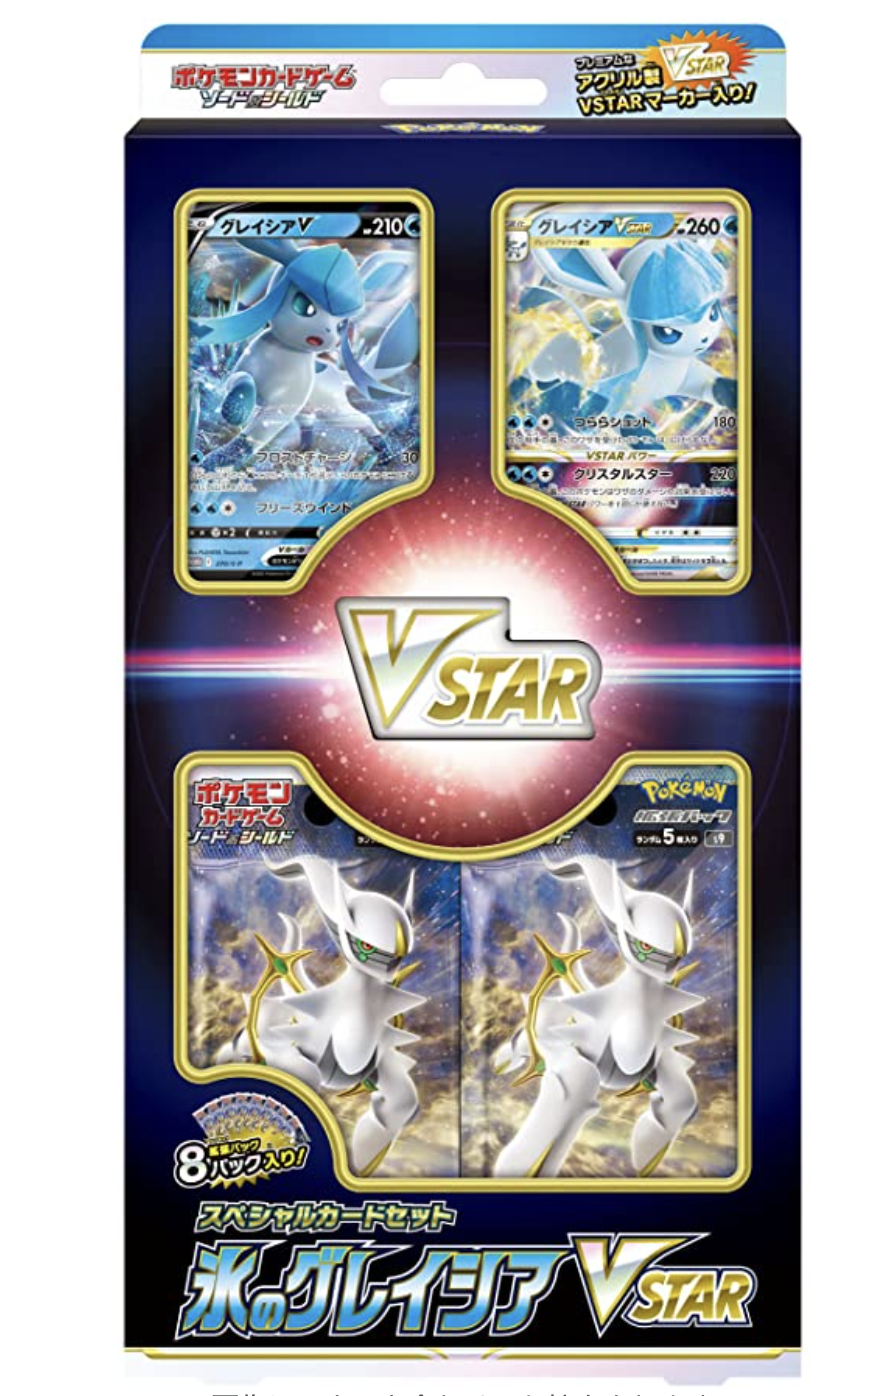 Starbirth GLACEON VSTAR Collection (Japanese) Box (8 booster packs +promos)